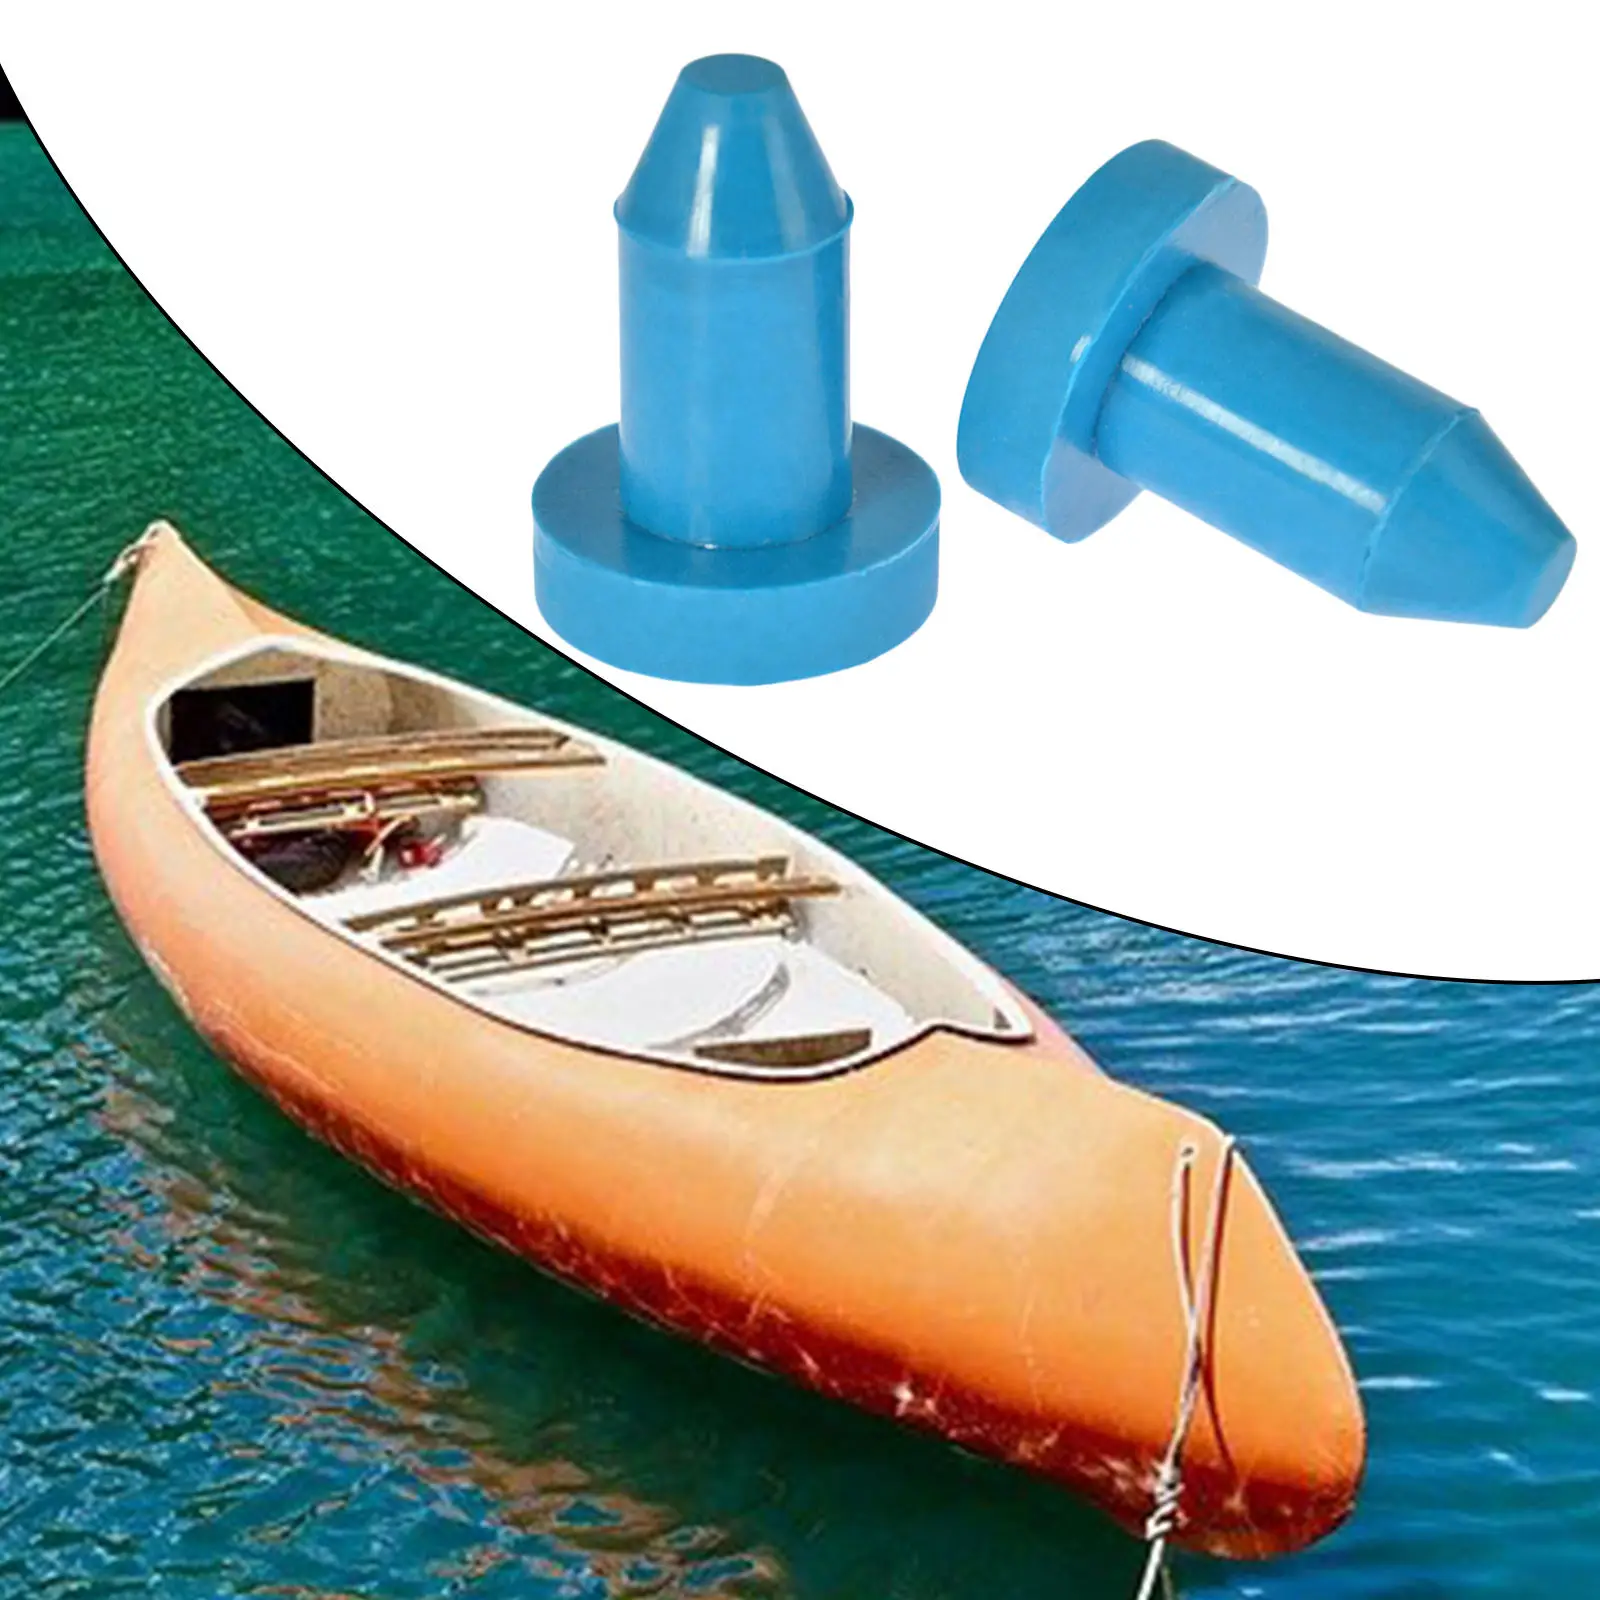 2 Pcs Kayak Drain Plug Rubber Scupper Plugs Drain Holes Stopper Bung for Most Fishing Boats Kayaks Accessories